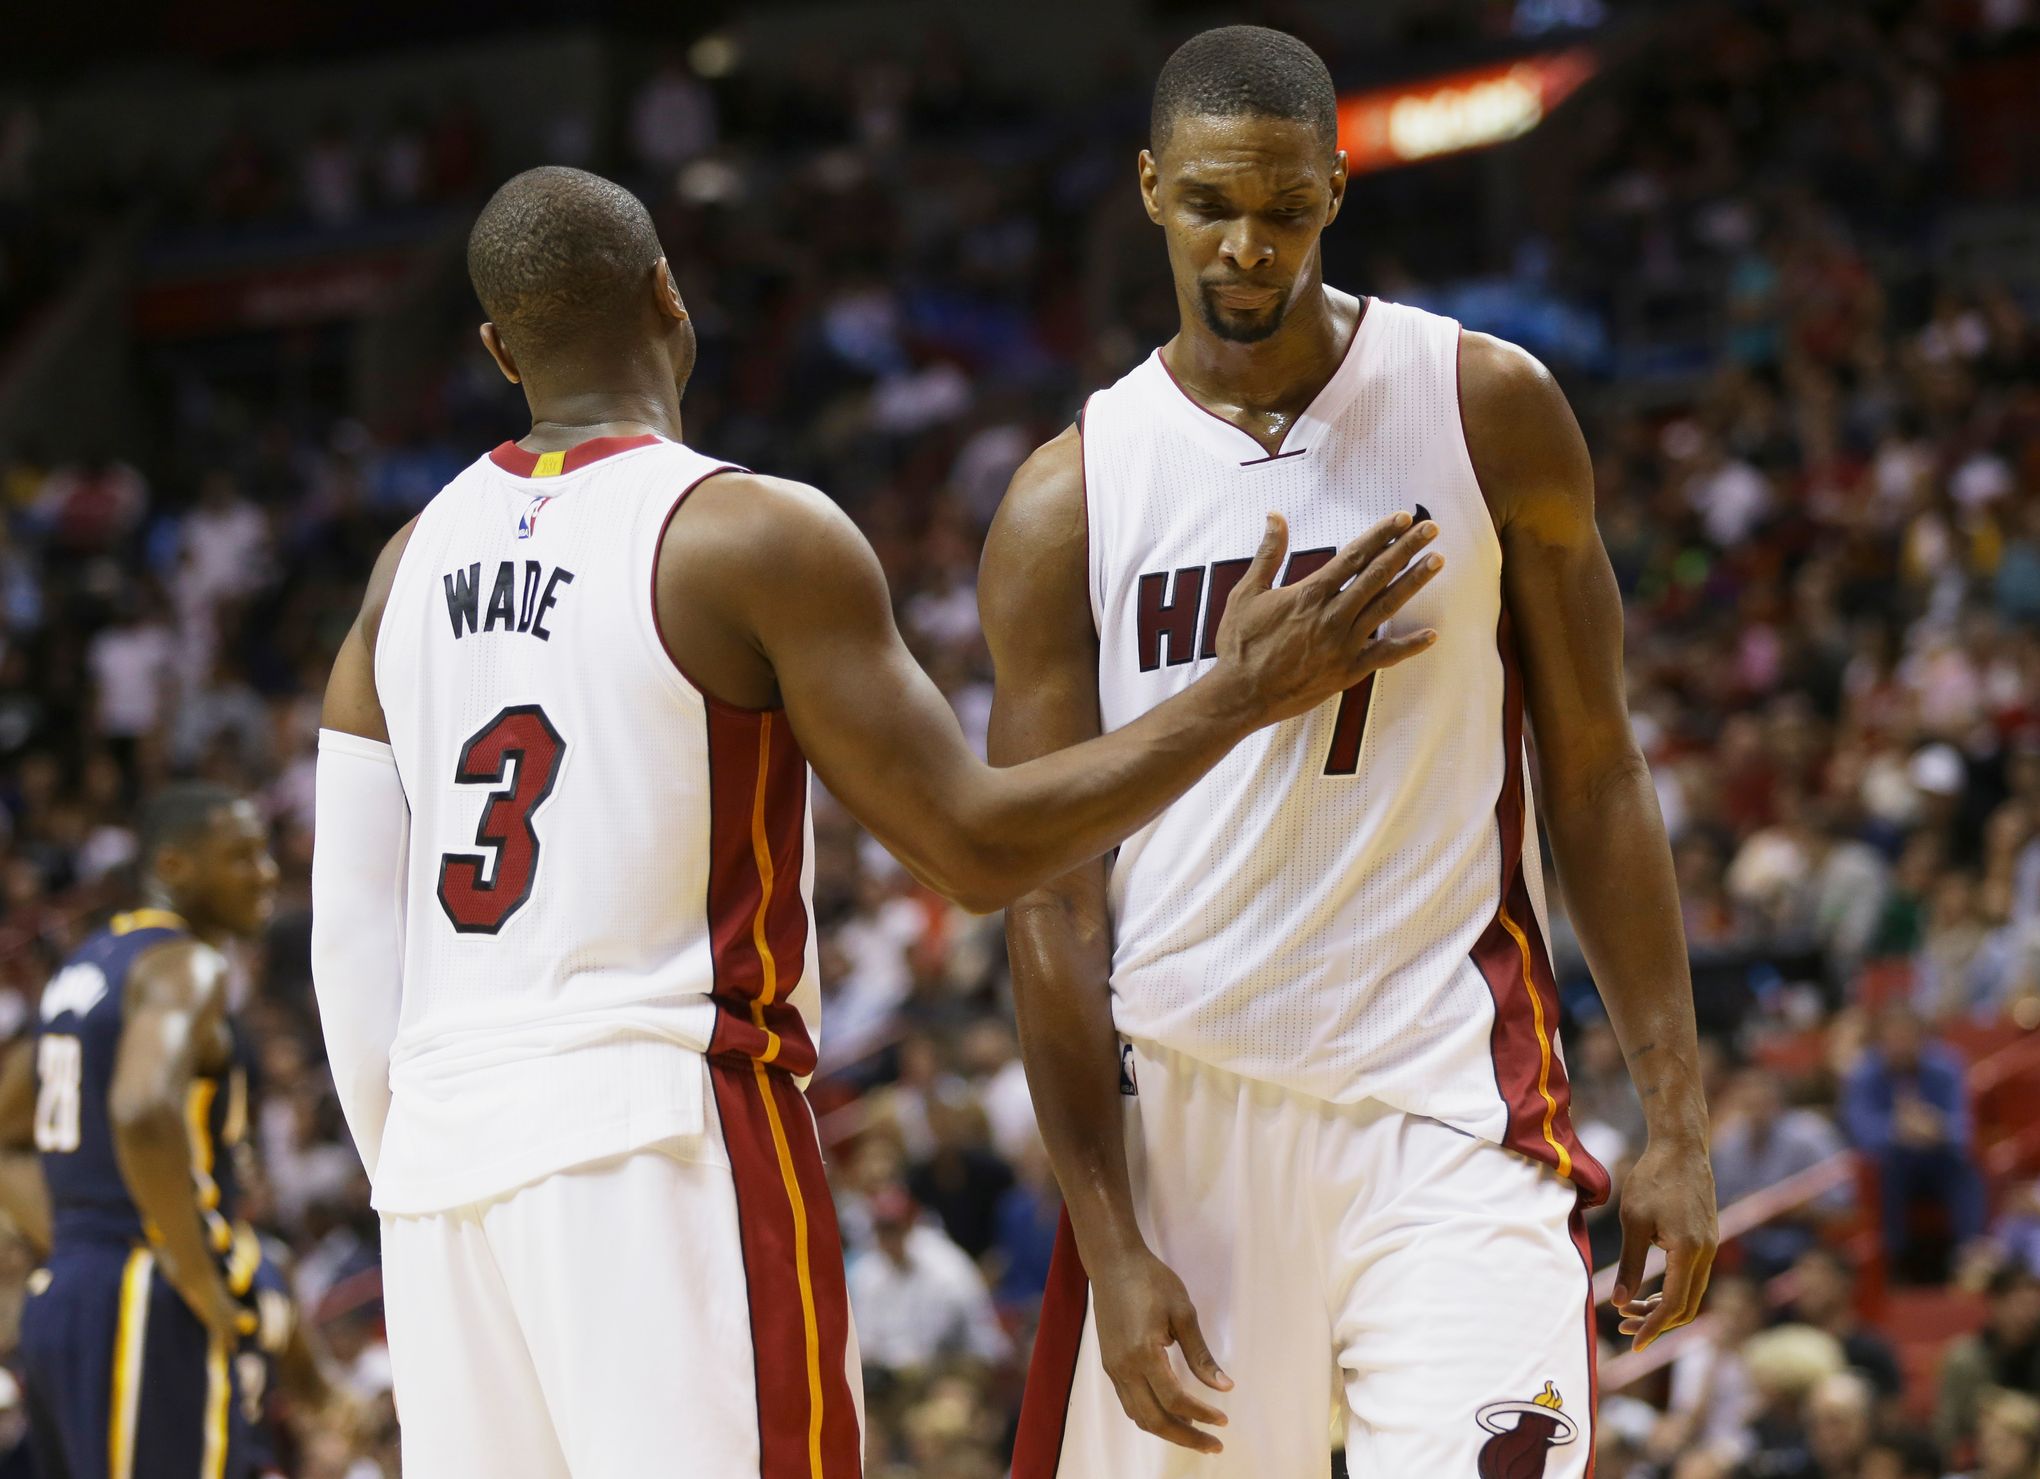 Chris Bosh is still considering an NBA comeback, but maybe not for